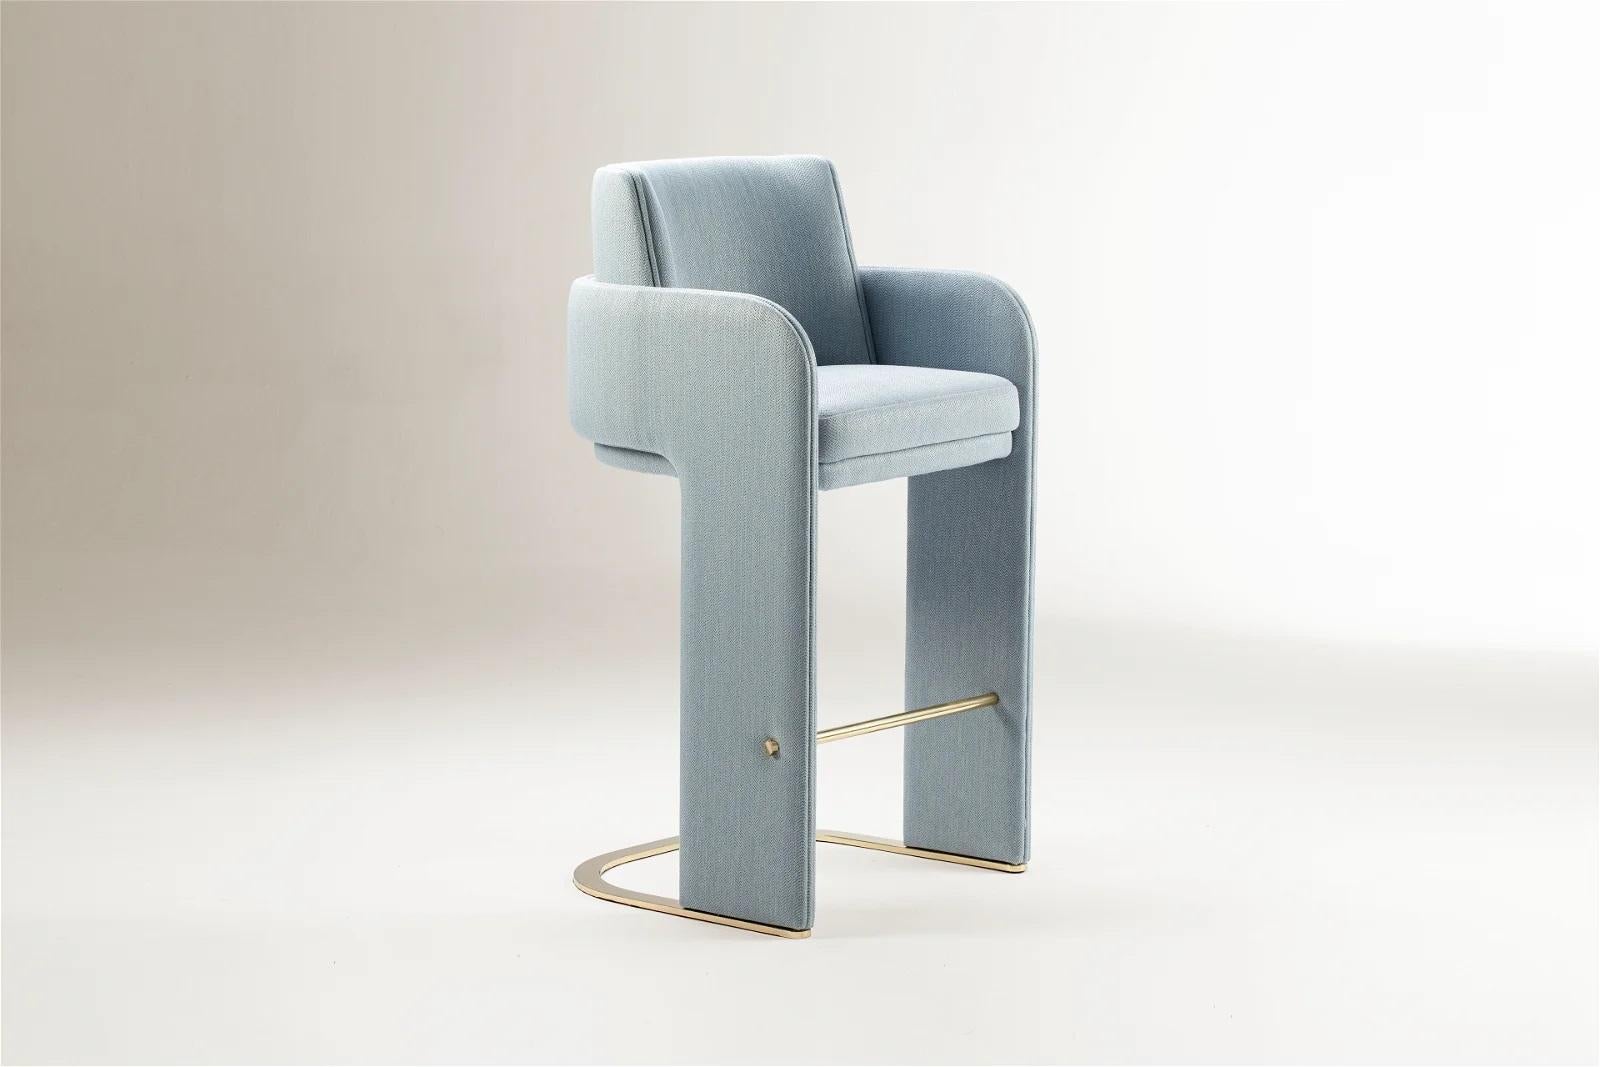 Portuguese DOOQ Bar Chair with Soft Light Blue Fabric and Brass Footrest Odisseia For Sale